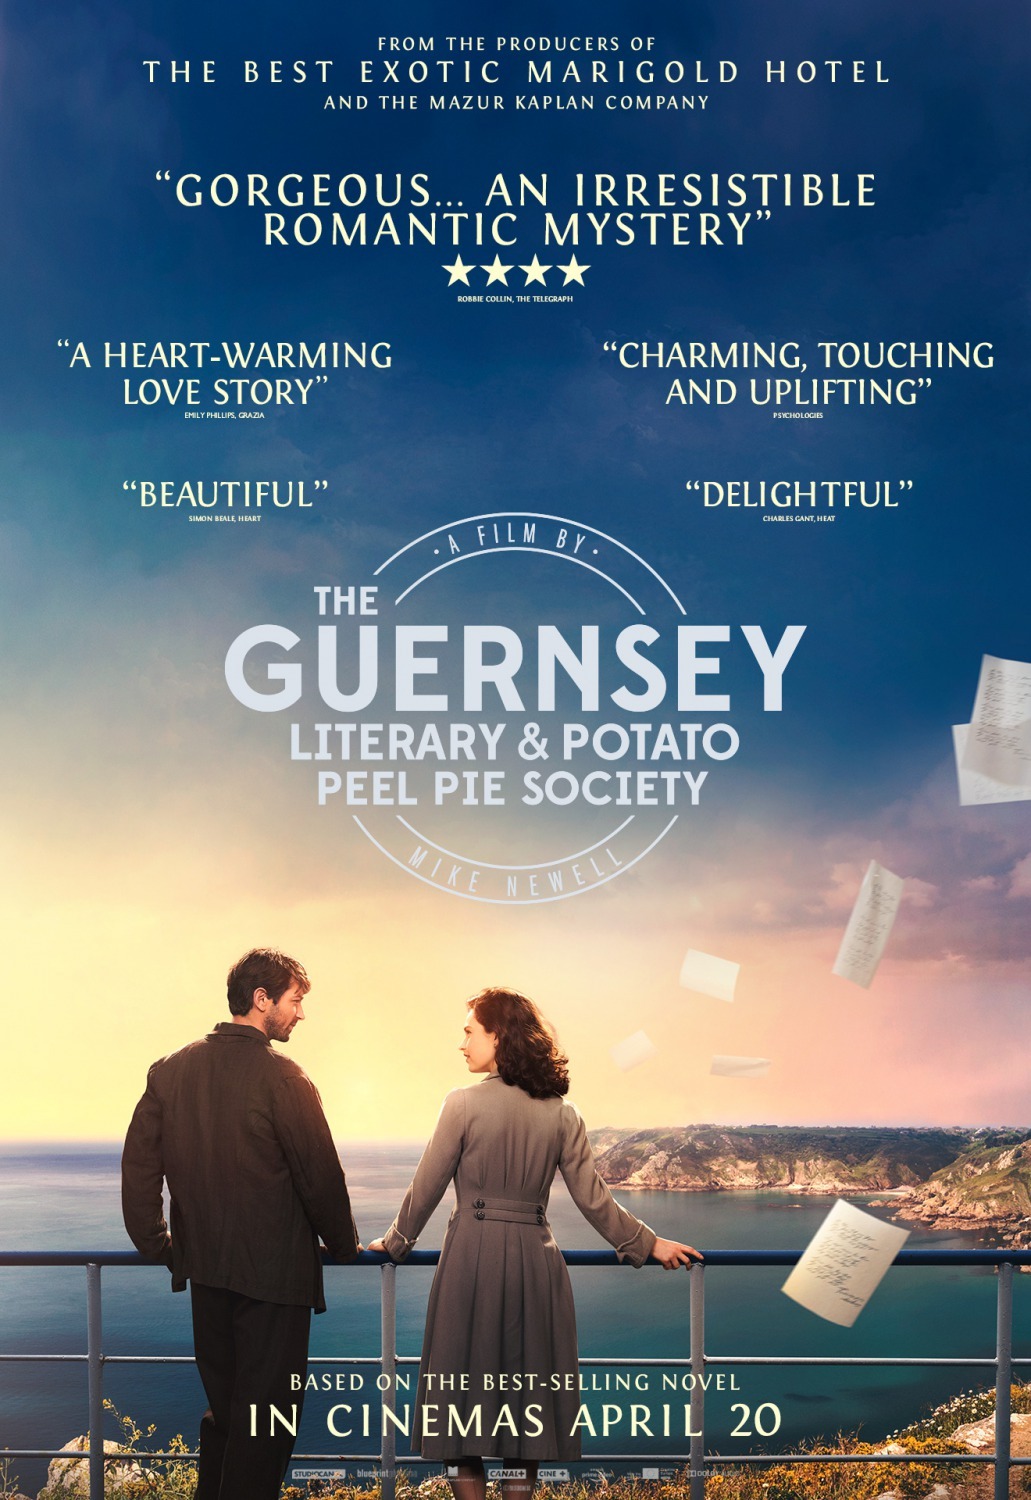 The Guernsey Literary & Potato Peel Pie Society de Mike Newell - Page 4 Tumblr_p7116vvR5S1s56t2eo1_1280